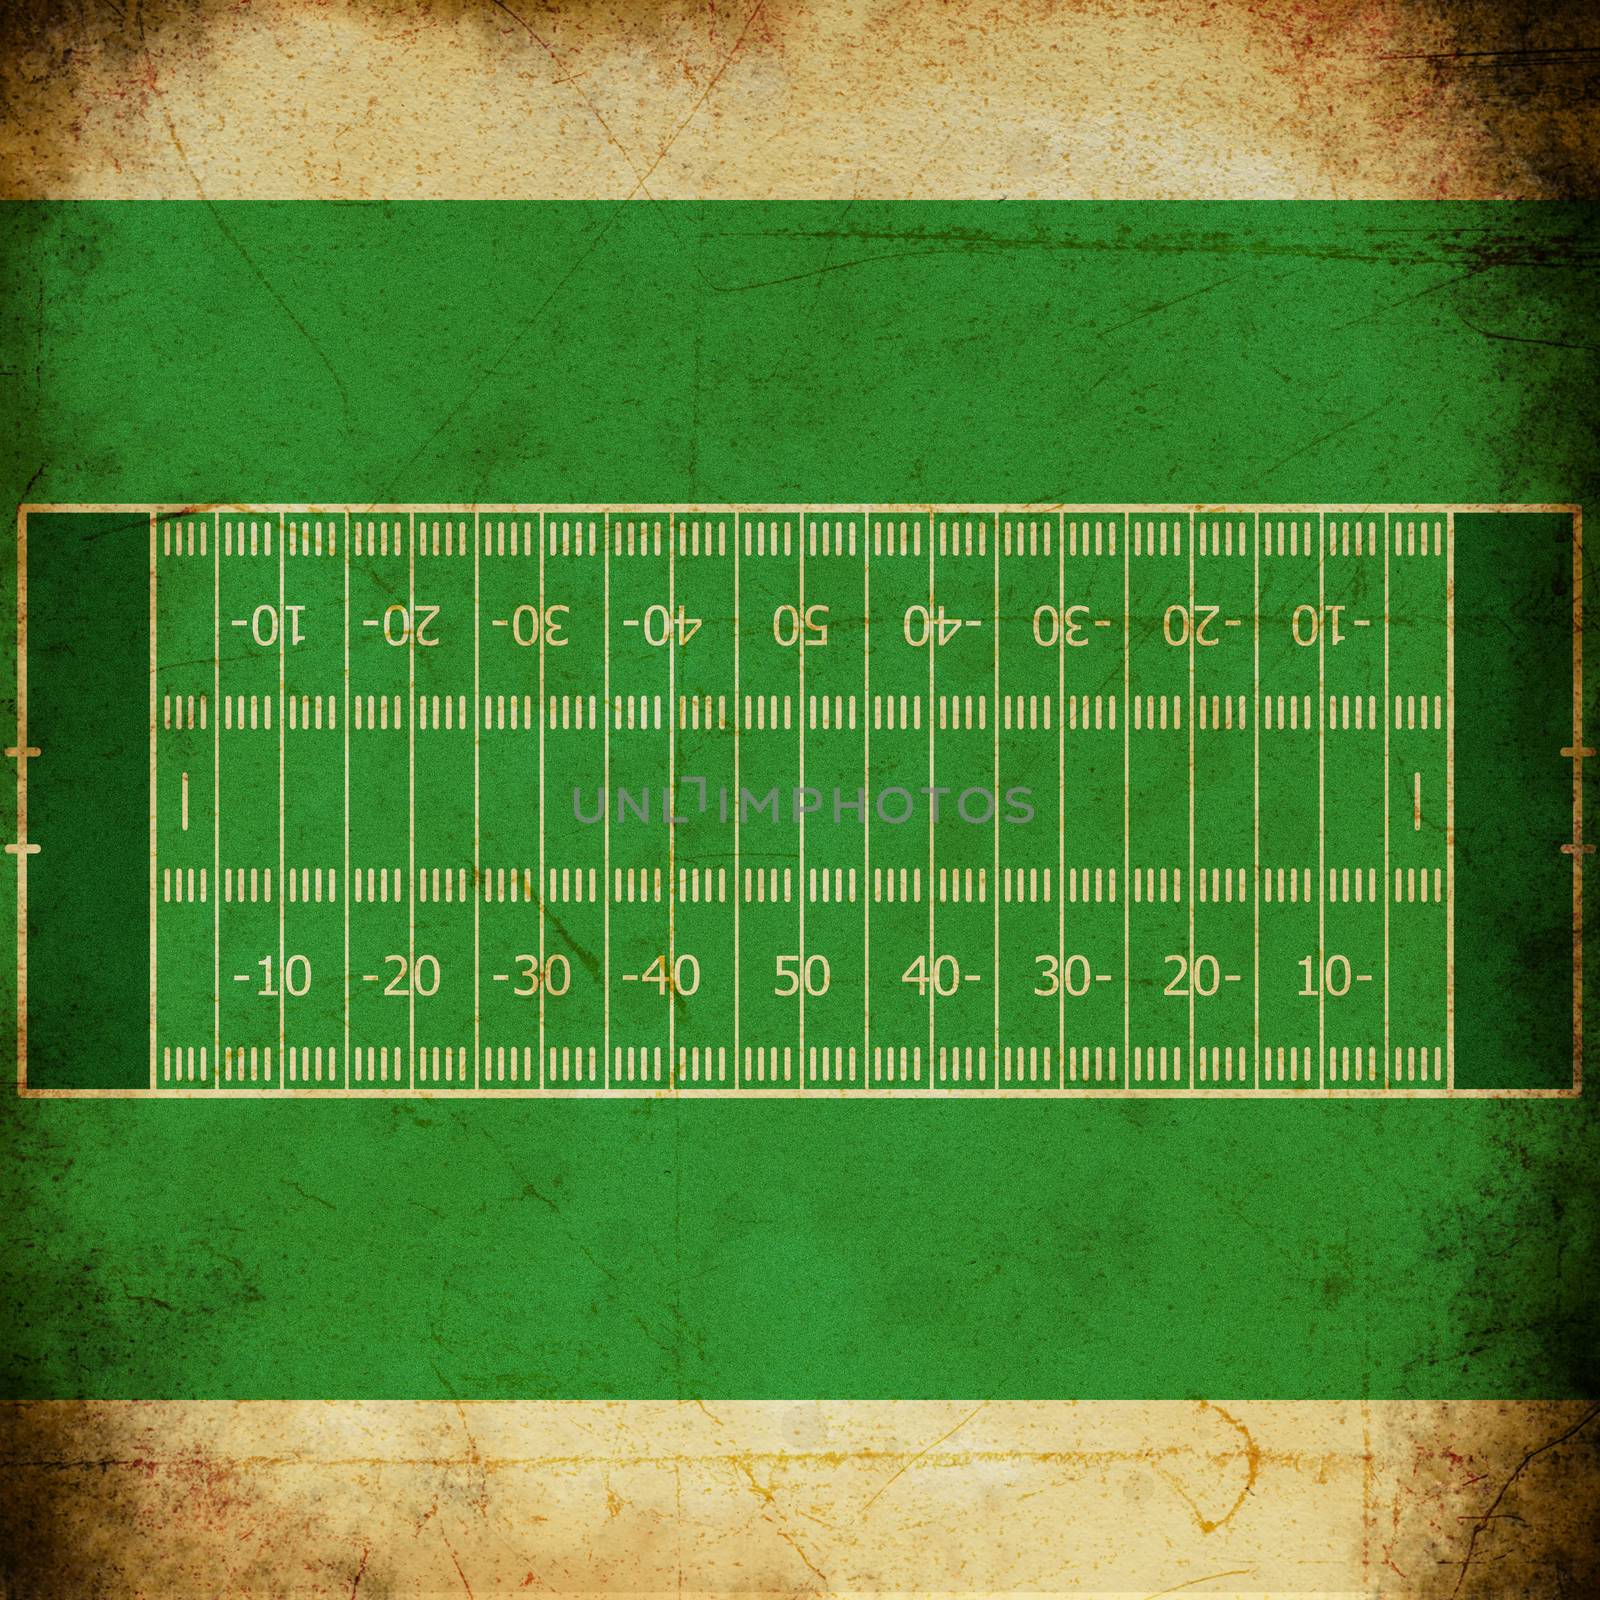 texture, vintage background of the american football field desig by tor00722